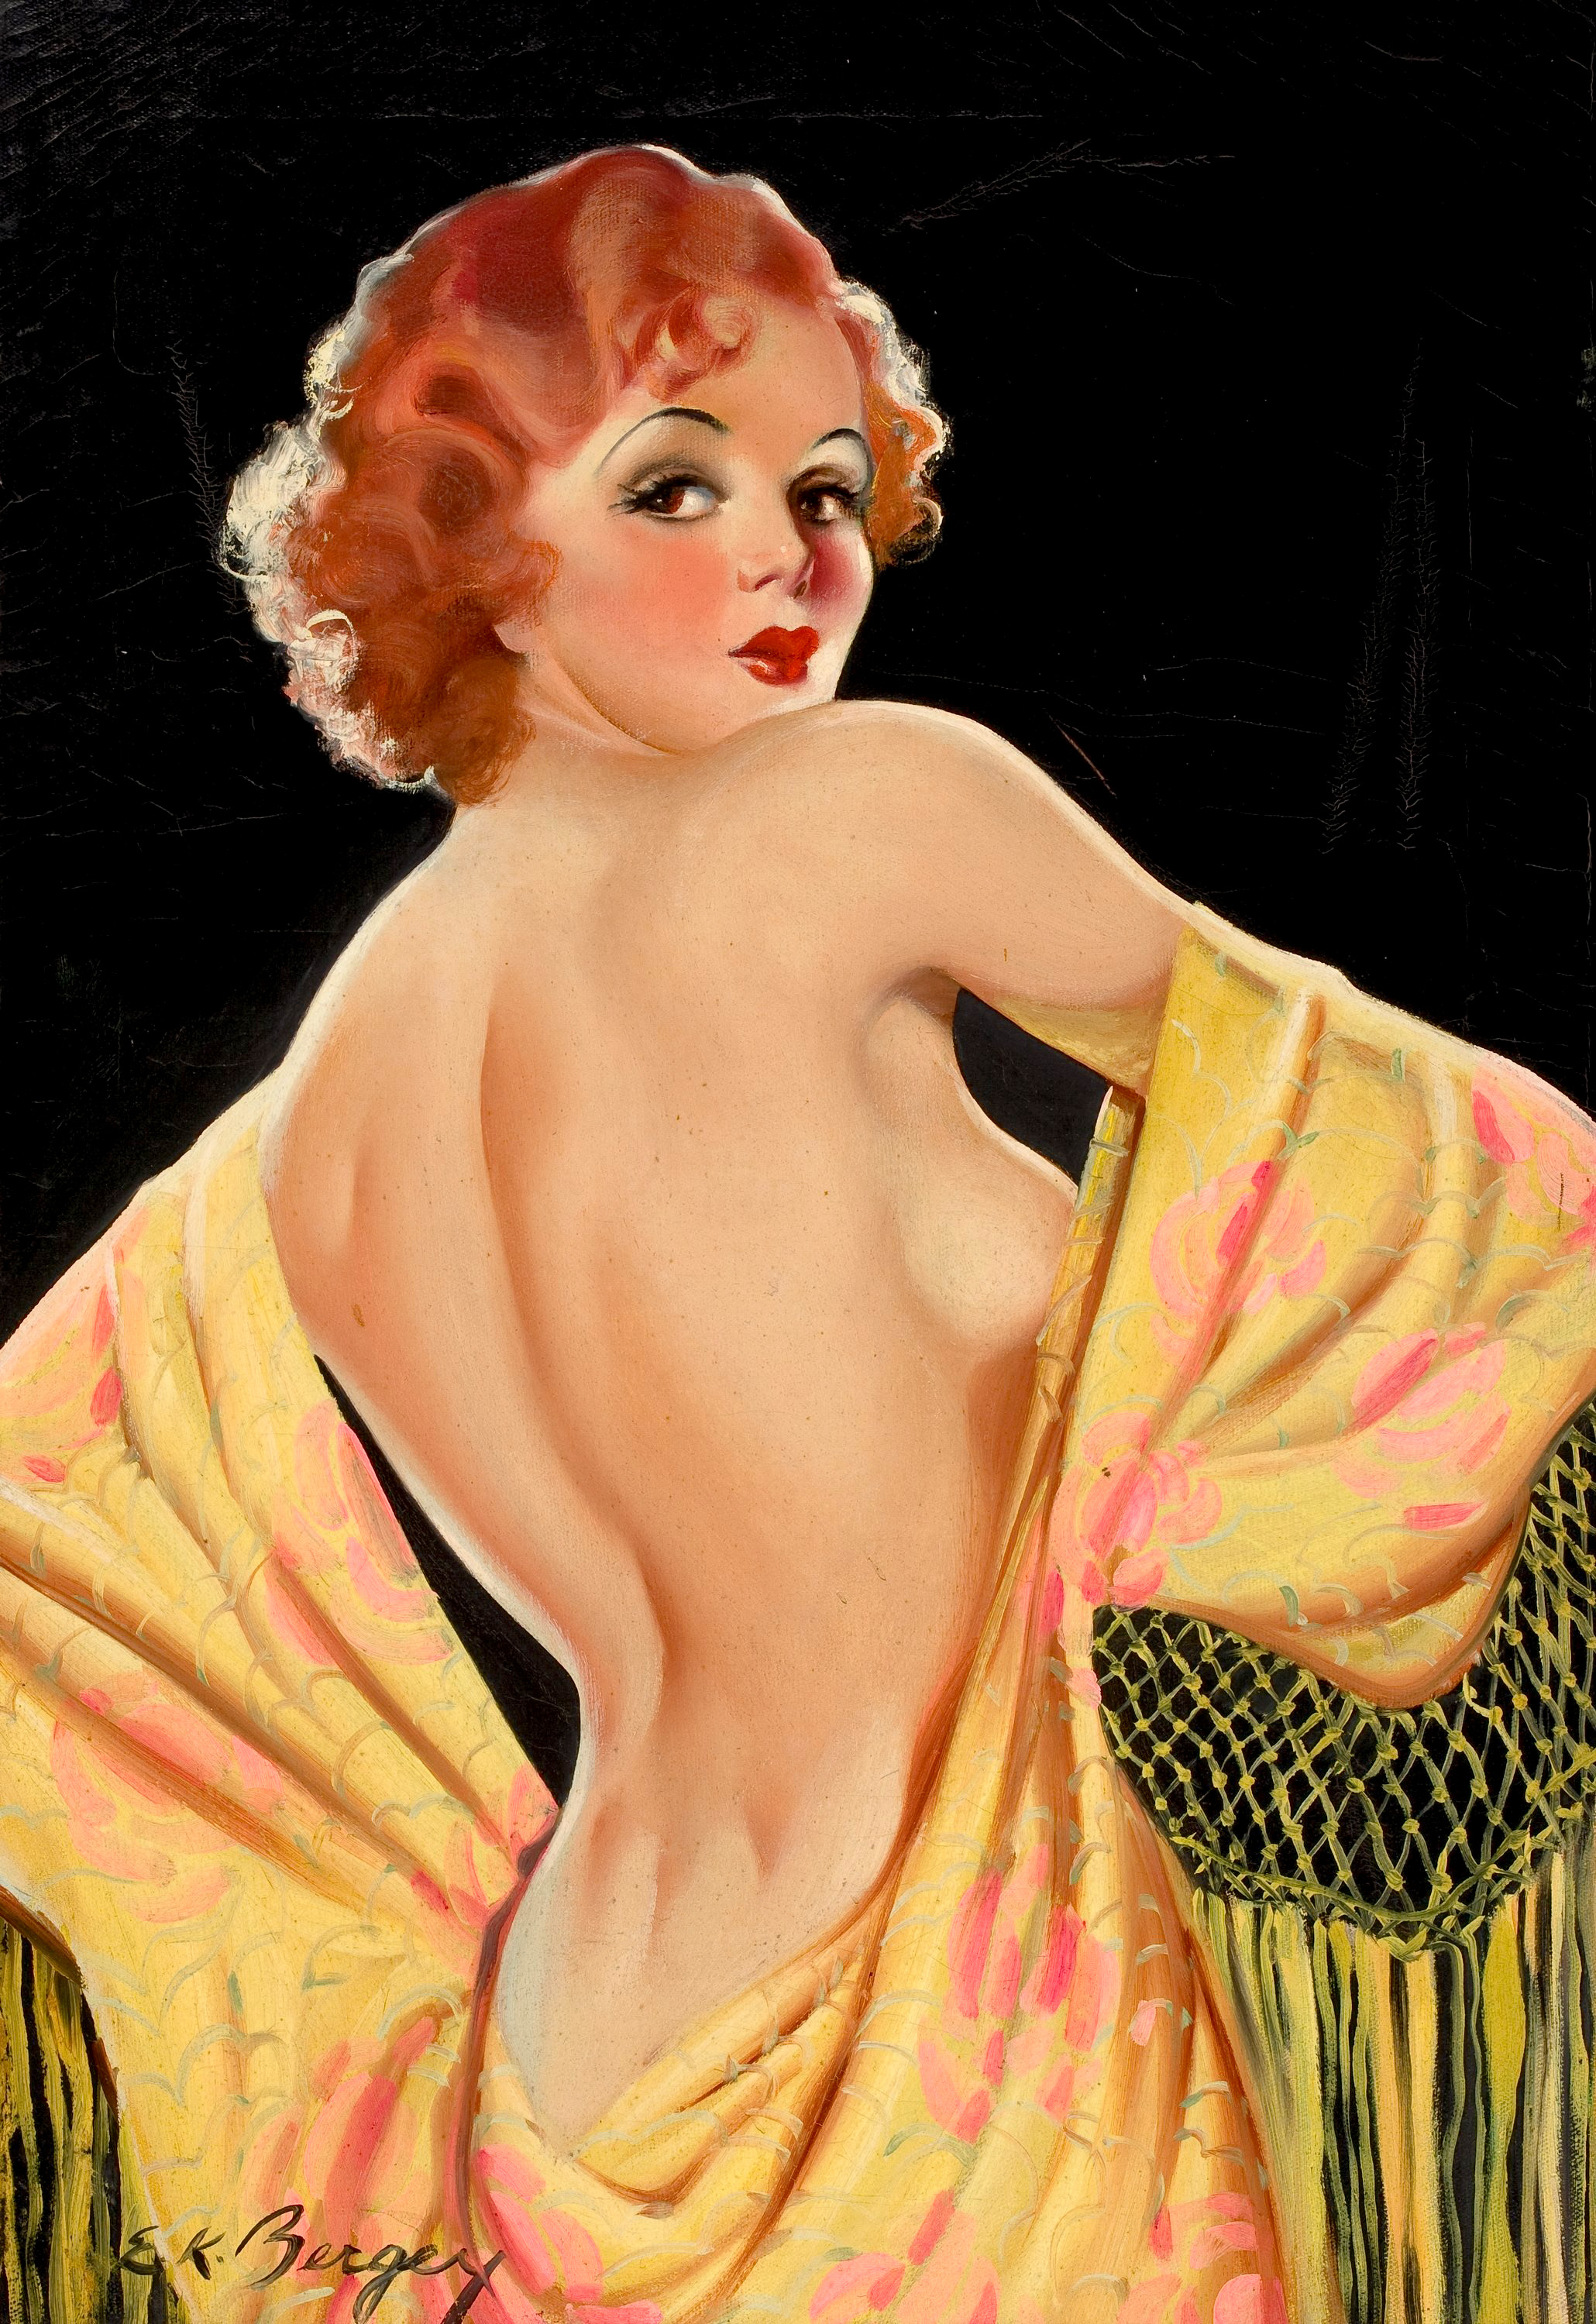 PEP Stories pulp cover, May 1936